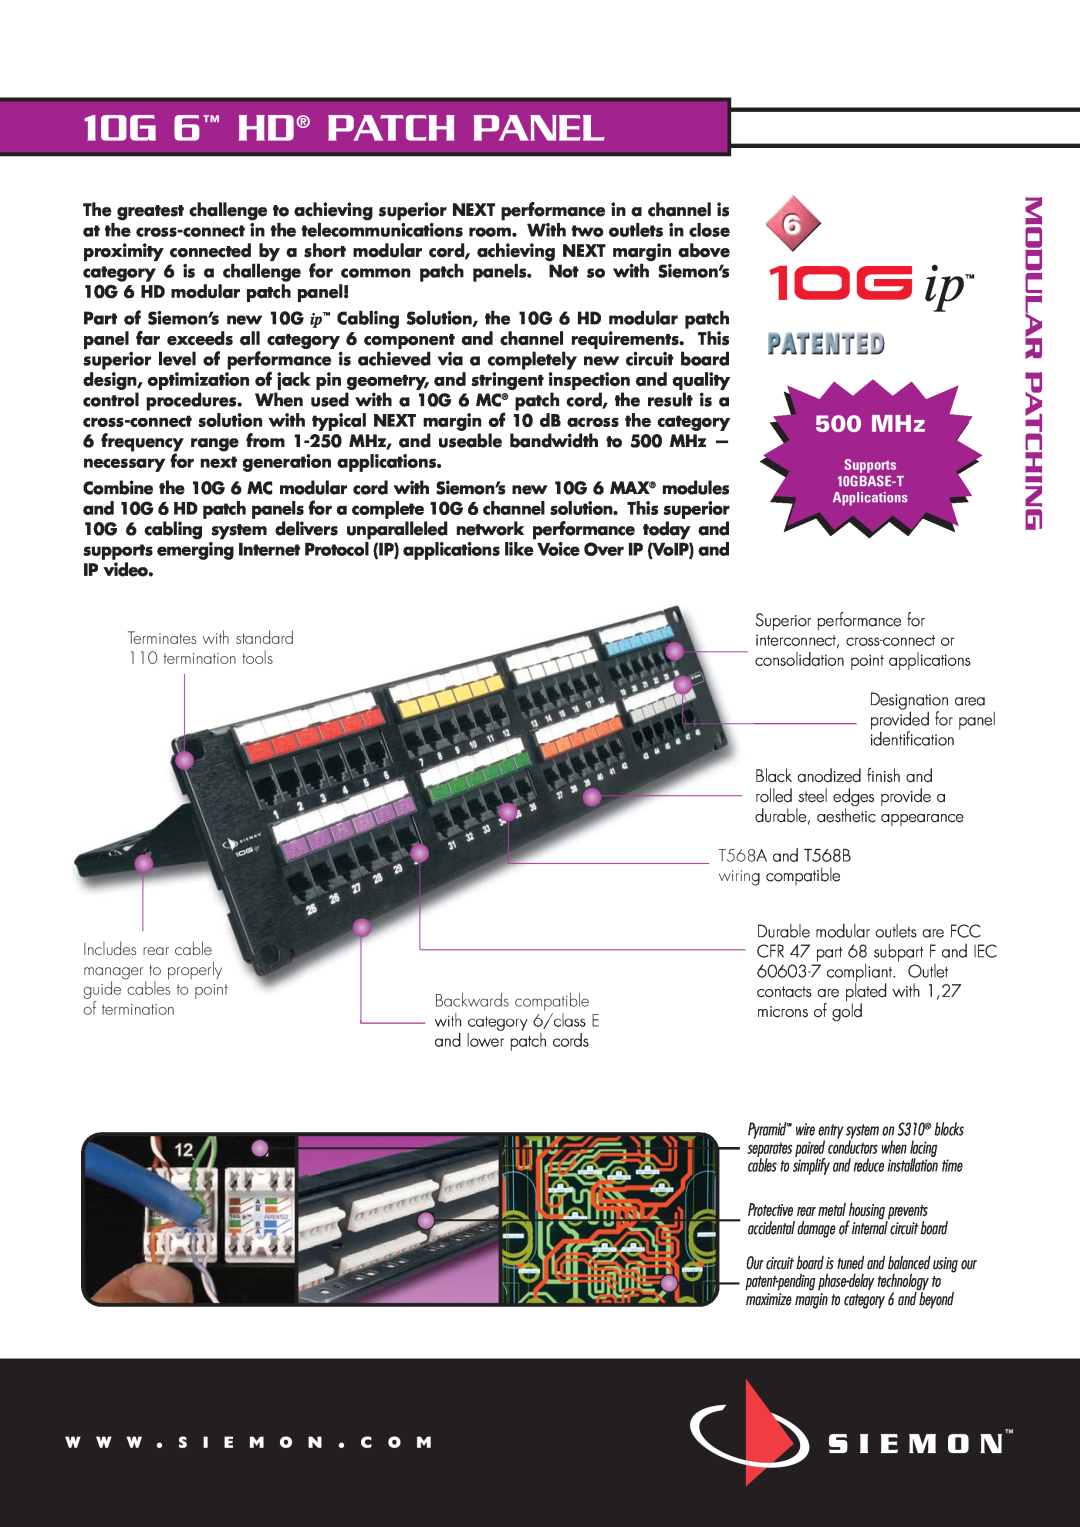 The Siemon Company manual 10G 6 HD PATCH PANEL, Modular Patching, 500 MHz, W W W . S I E M O N . C O M 